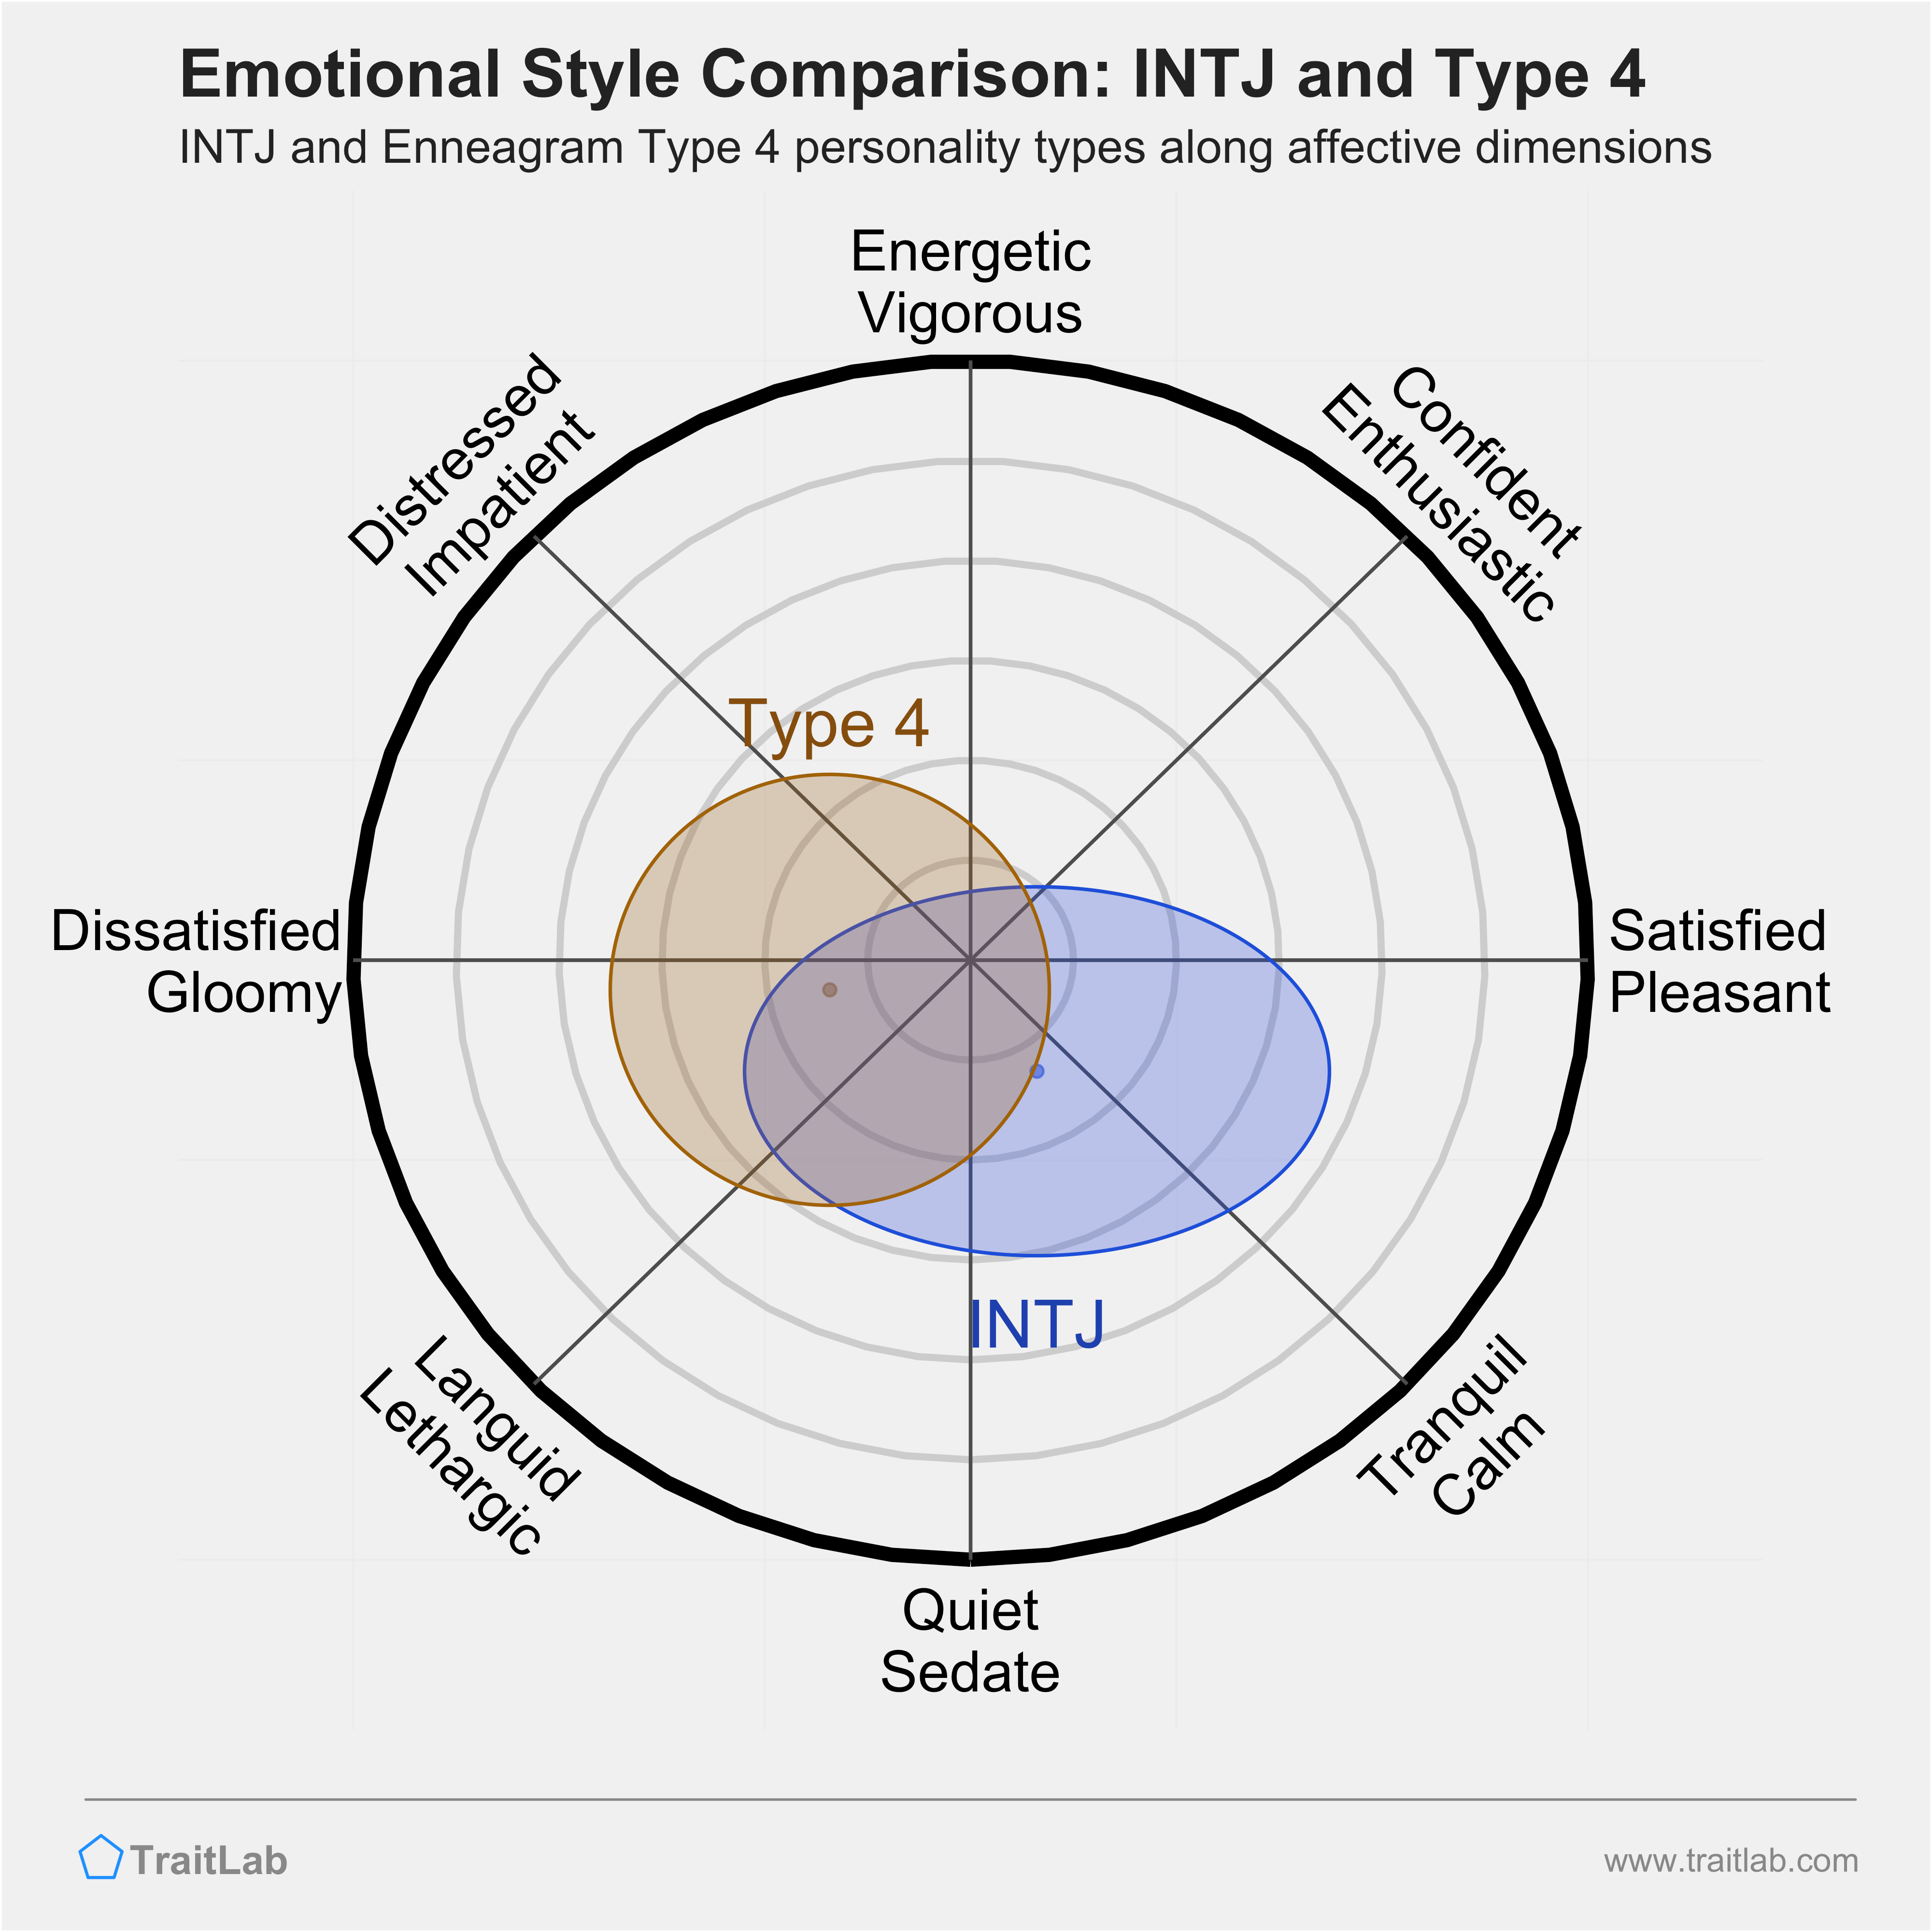 INTJ and Type 4 comparison across emotional (affective) dimensions